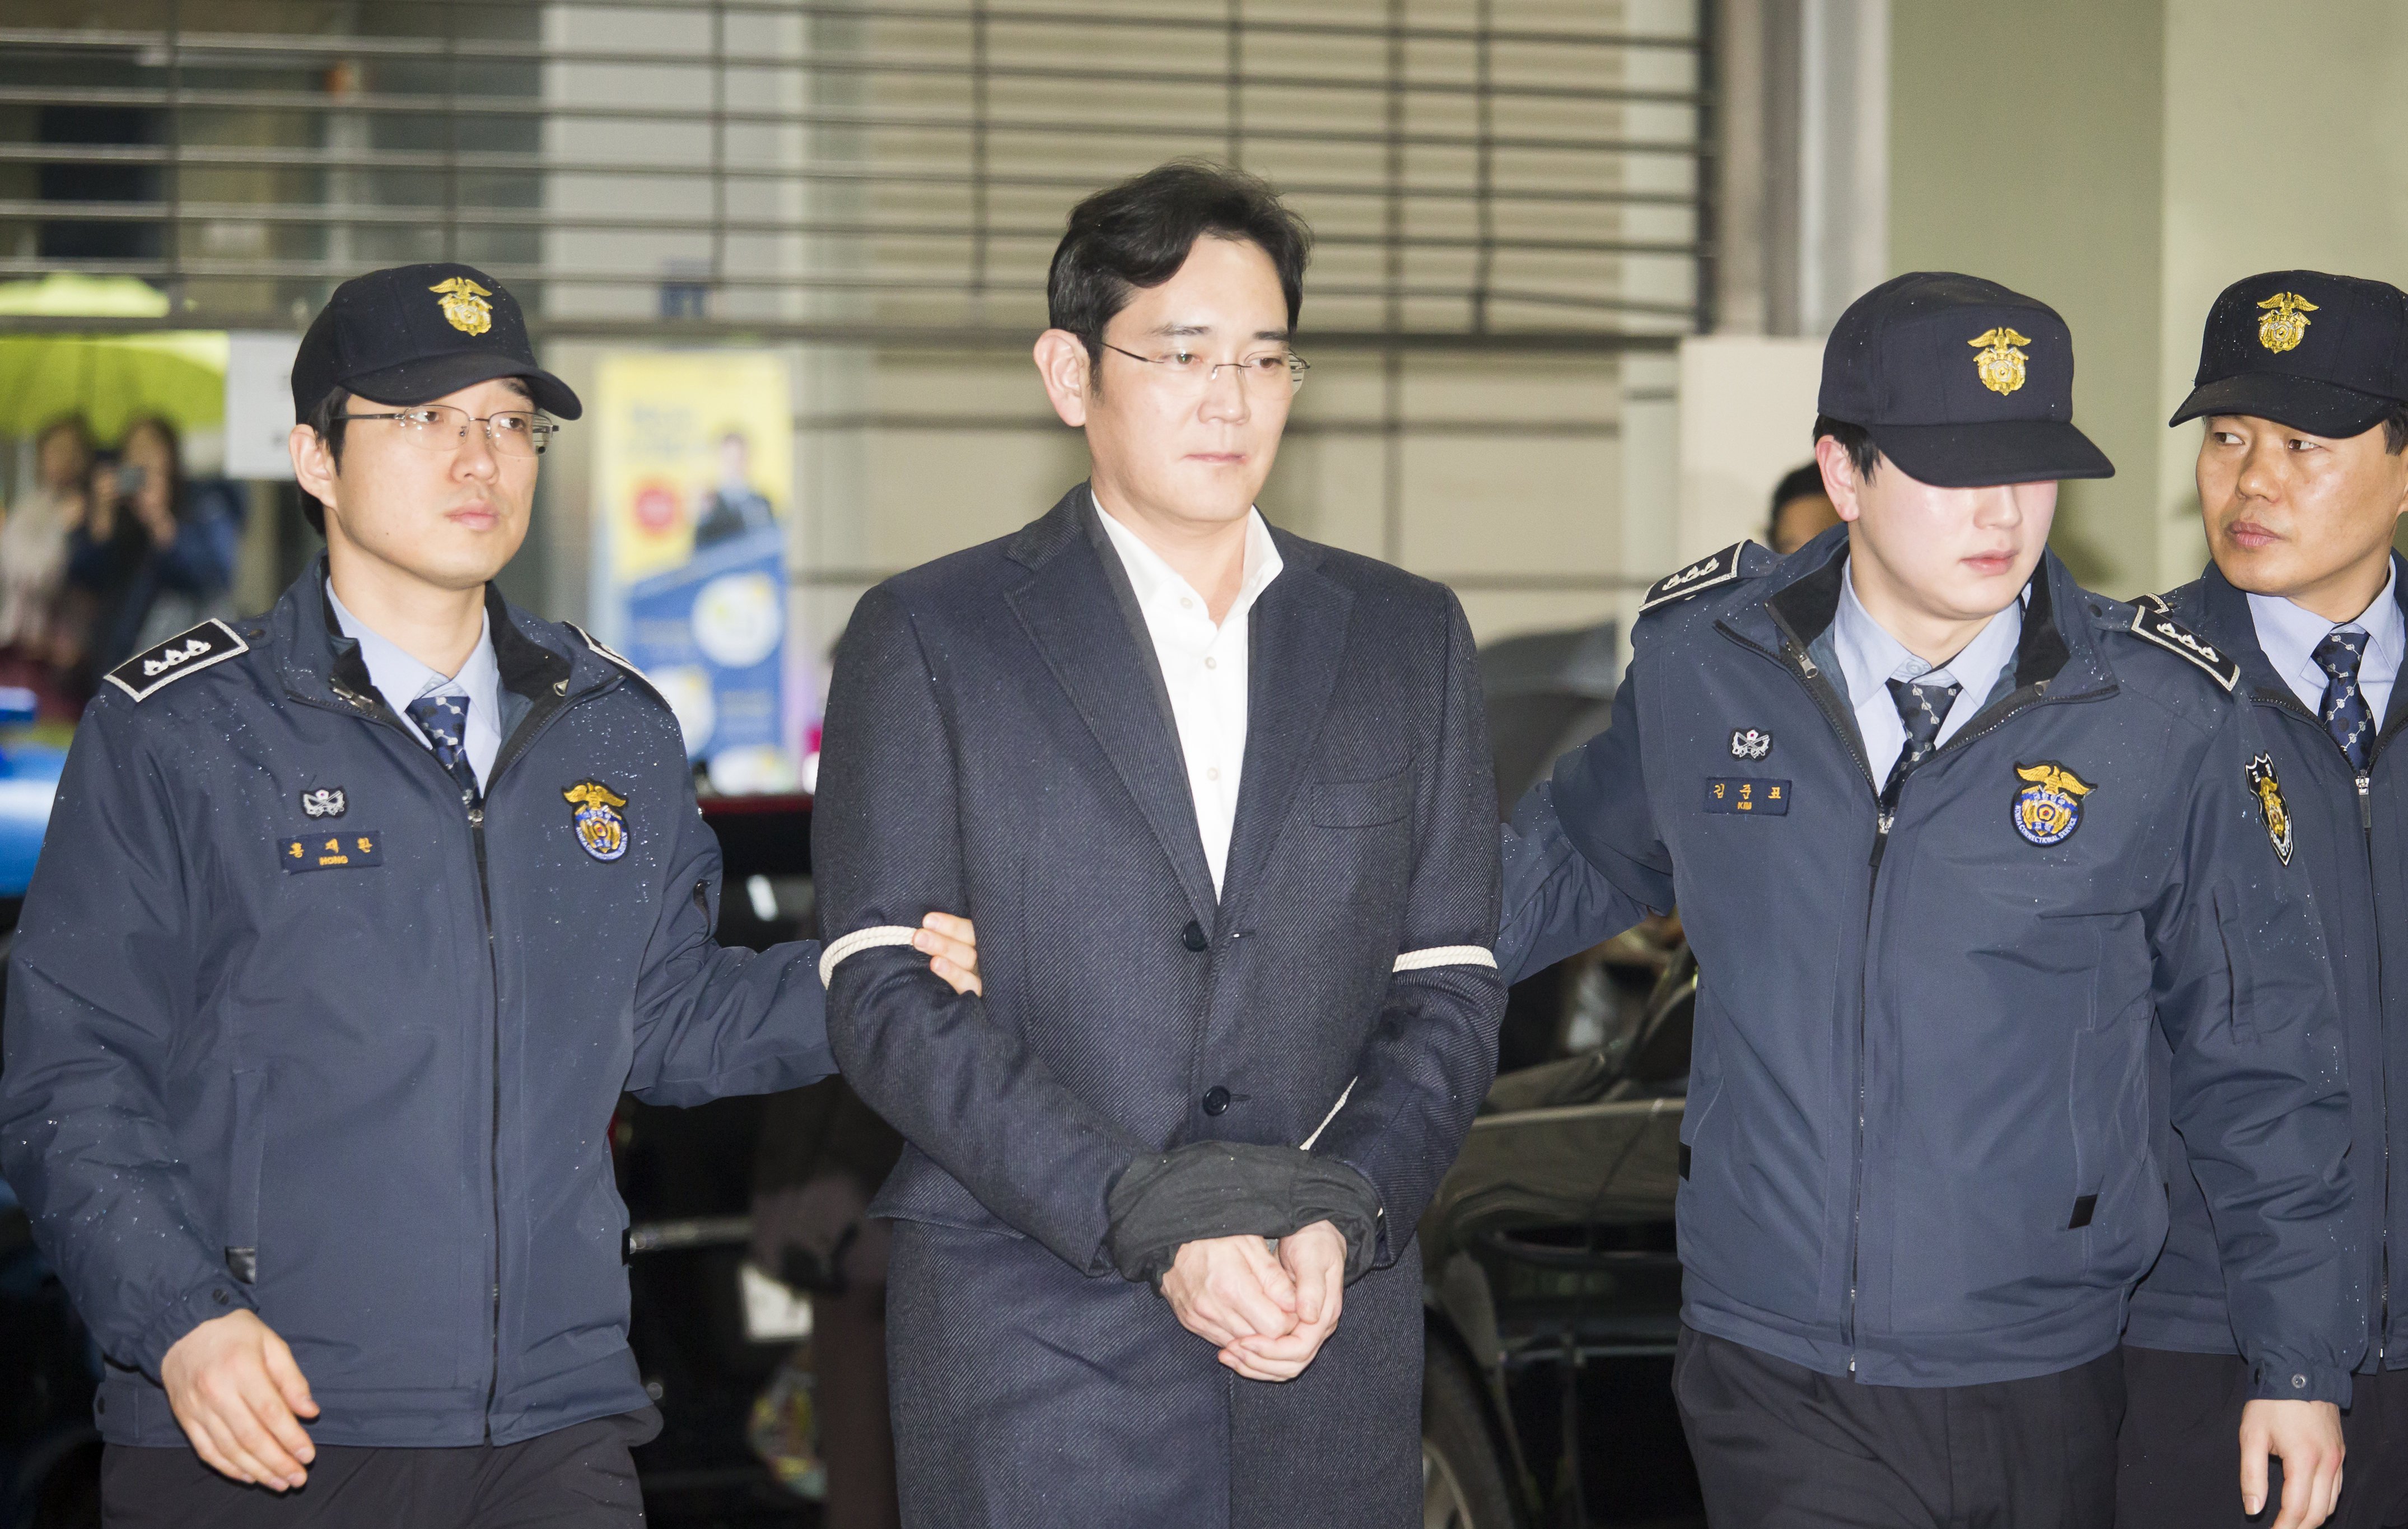 Samsung vice president pardoned in South Korea - now he can lead the company again